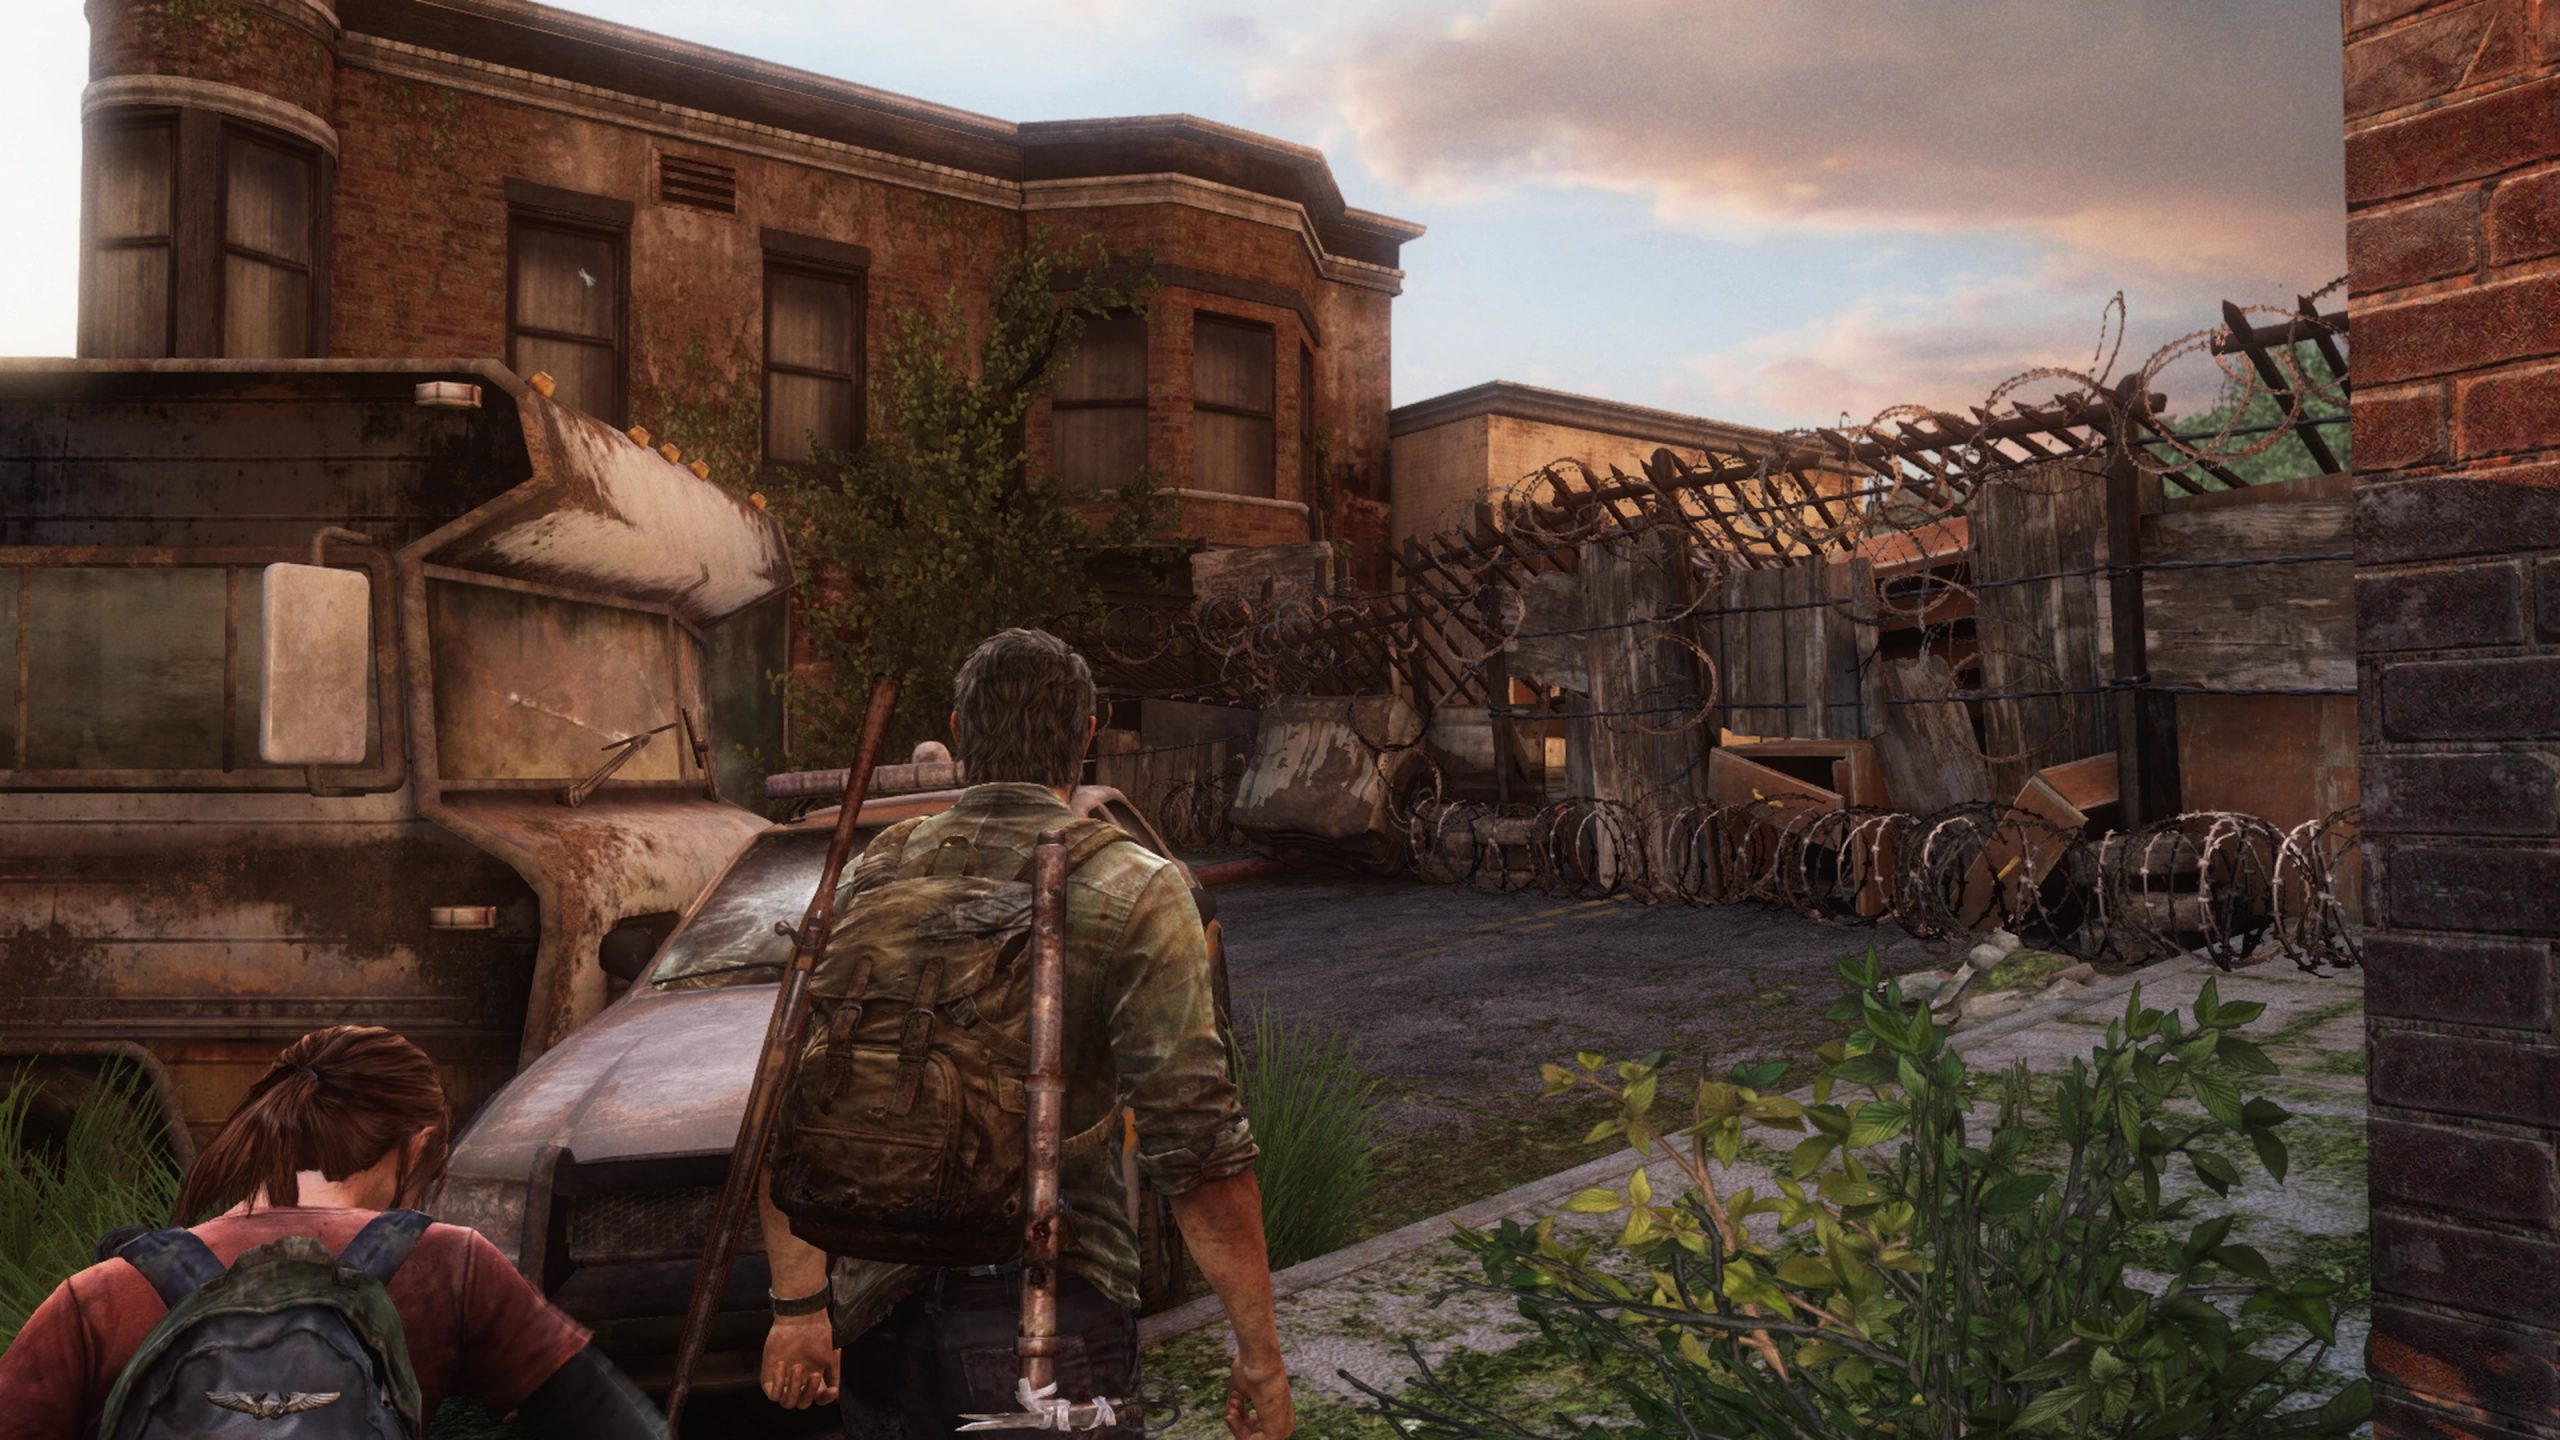 The Last Of Us Episode 3 Review: When Bill Met Frank 